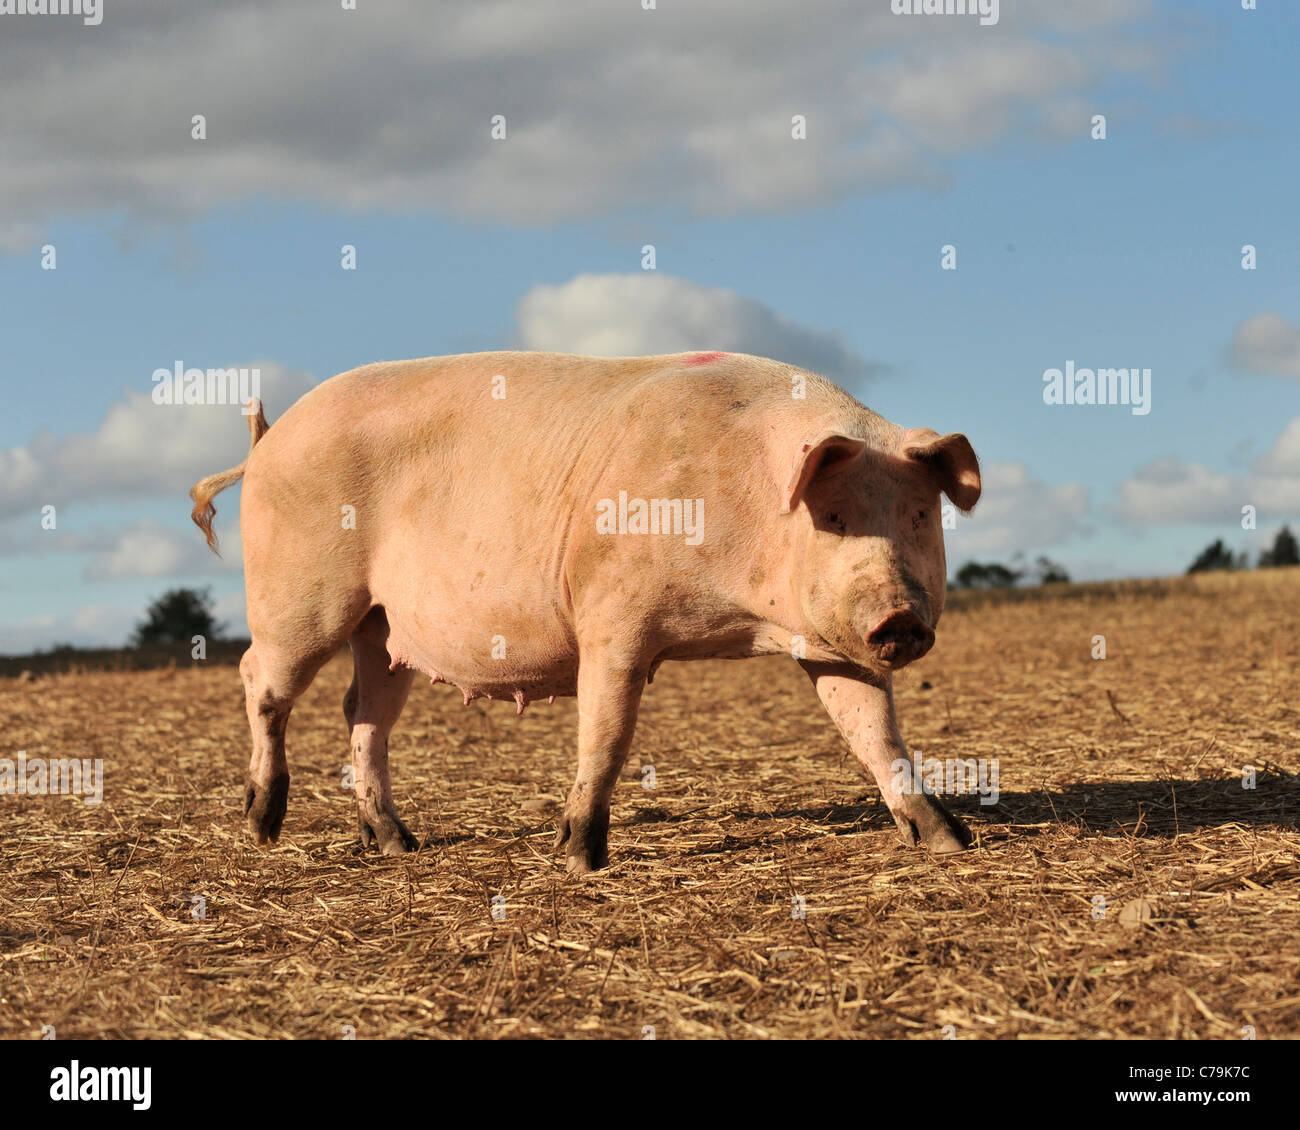 freerange pig in a field looking at camera Stock Photo